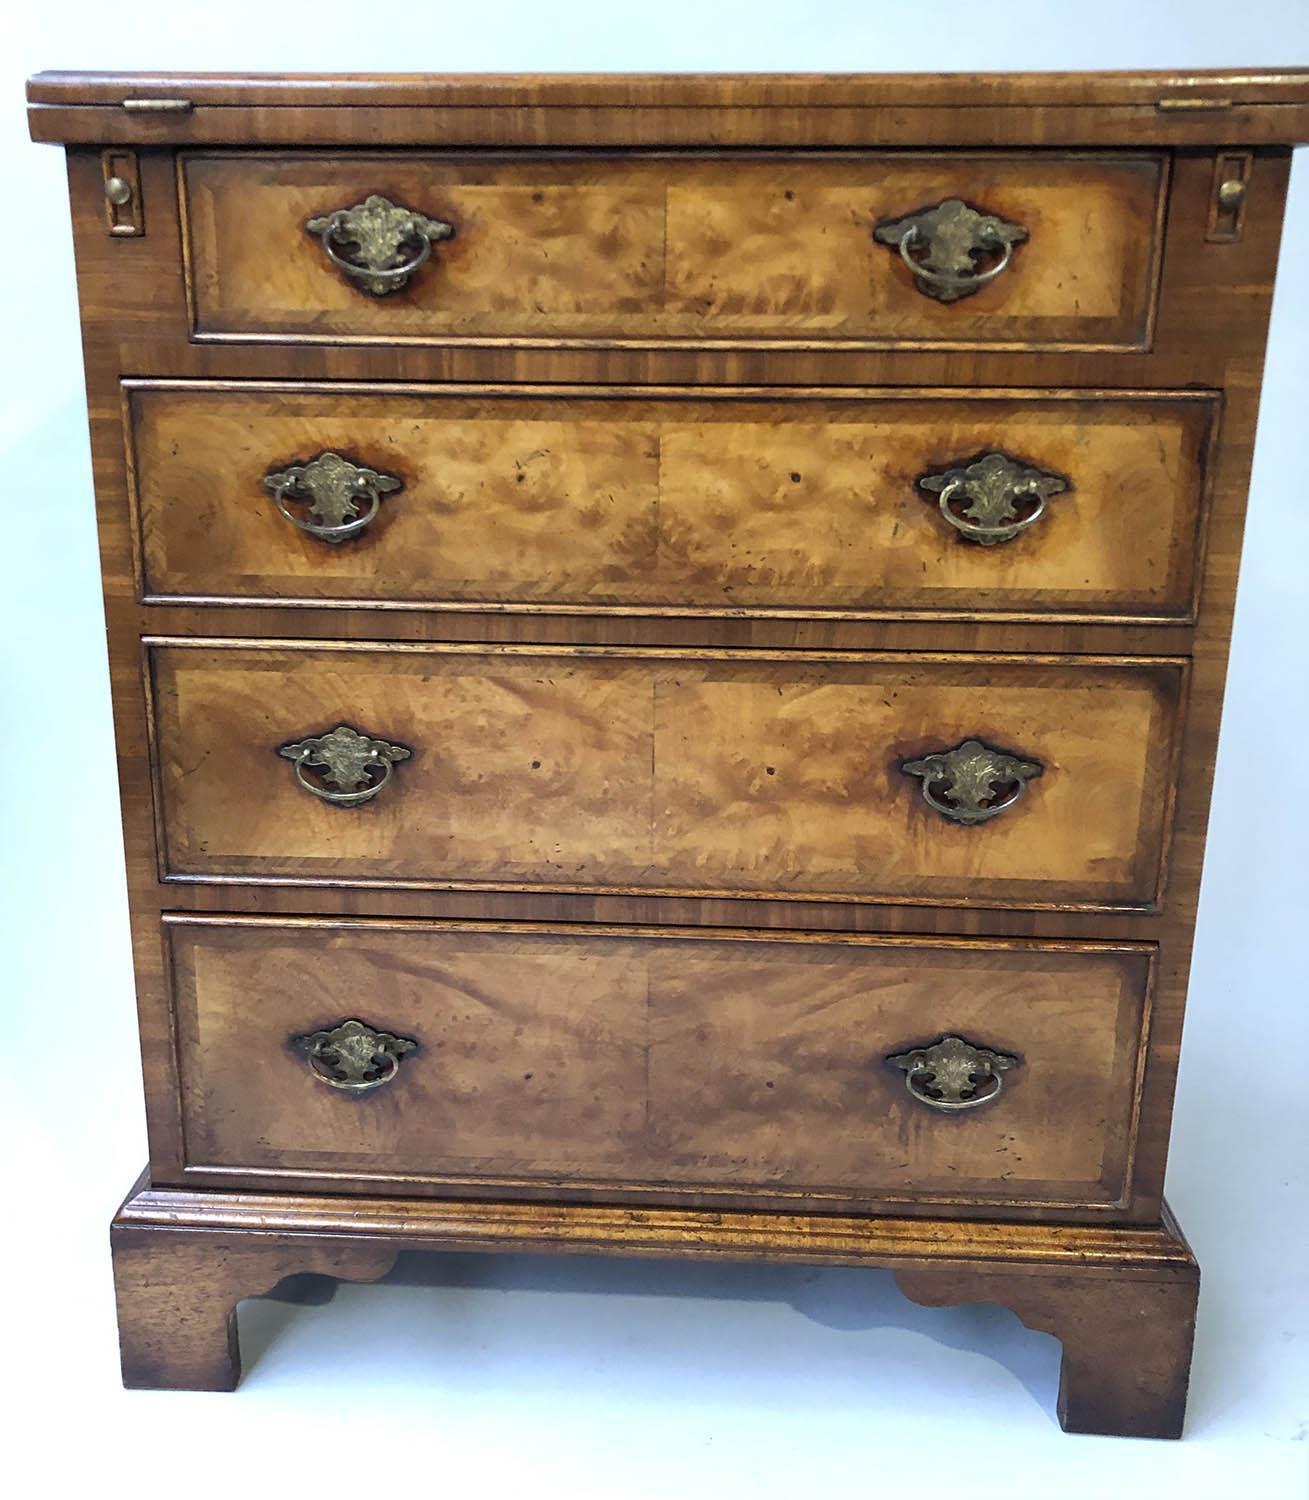 BACHELORS CHEST, George III design burr walnut and crossbanded with foldover top and four long